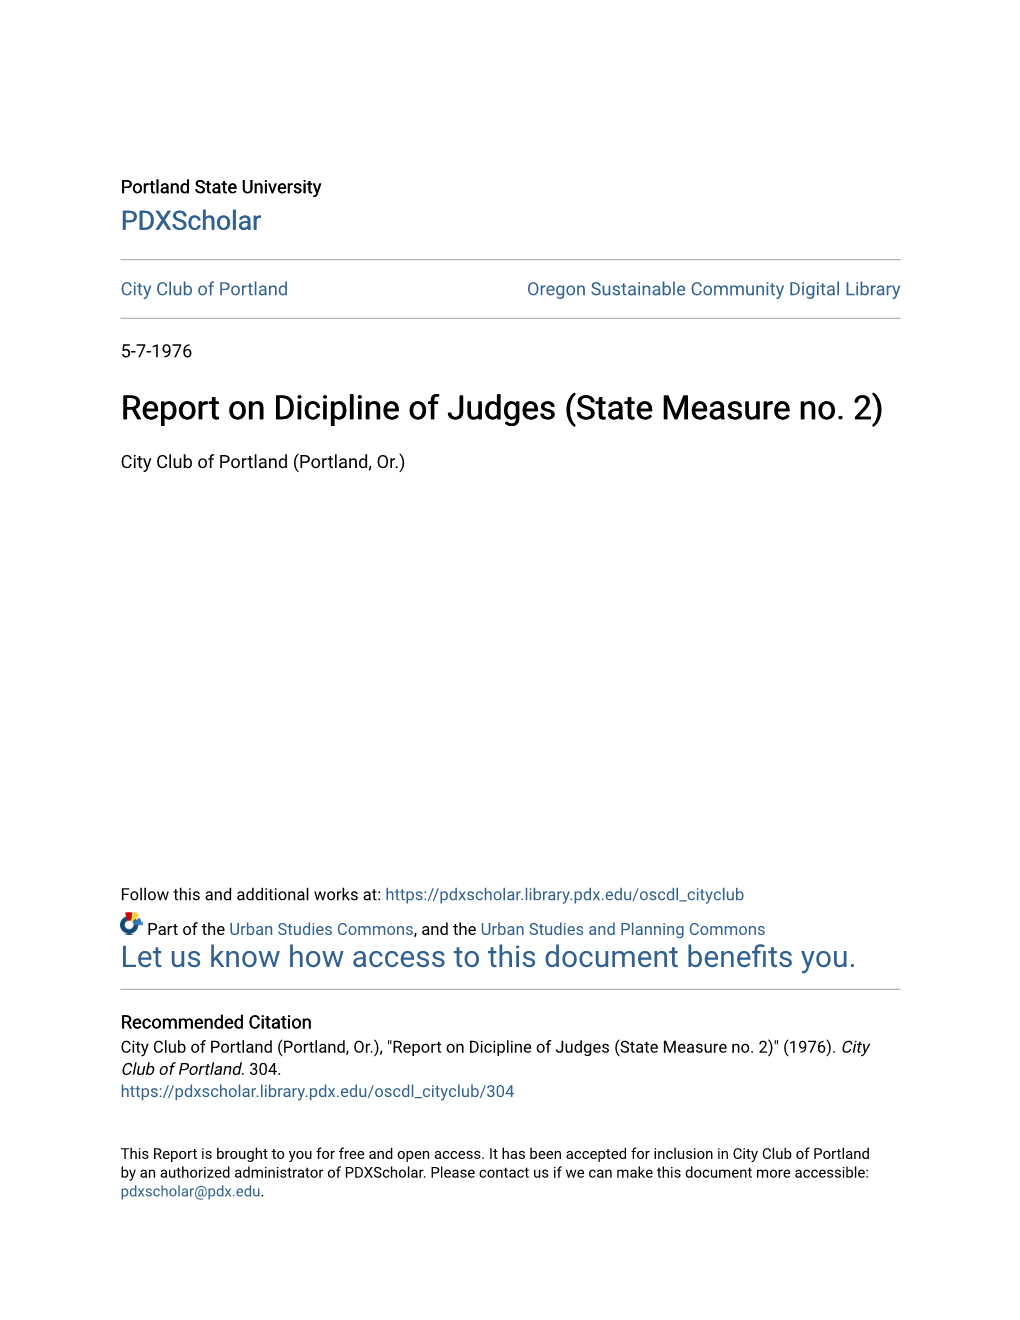 Report on Dicipline of Judges (State Measure No. 2)